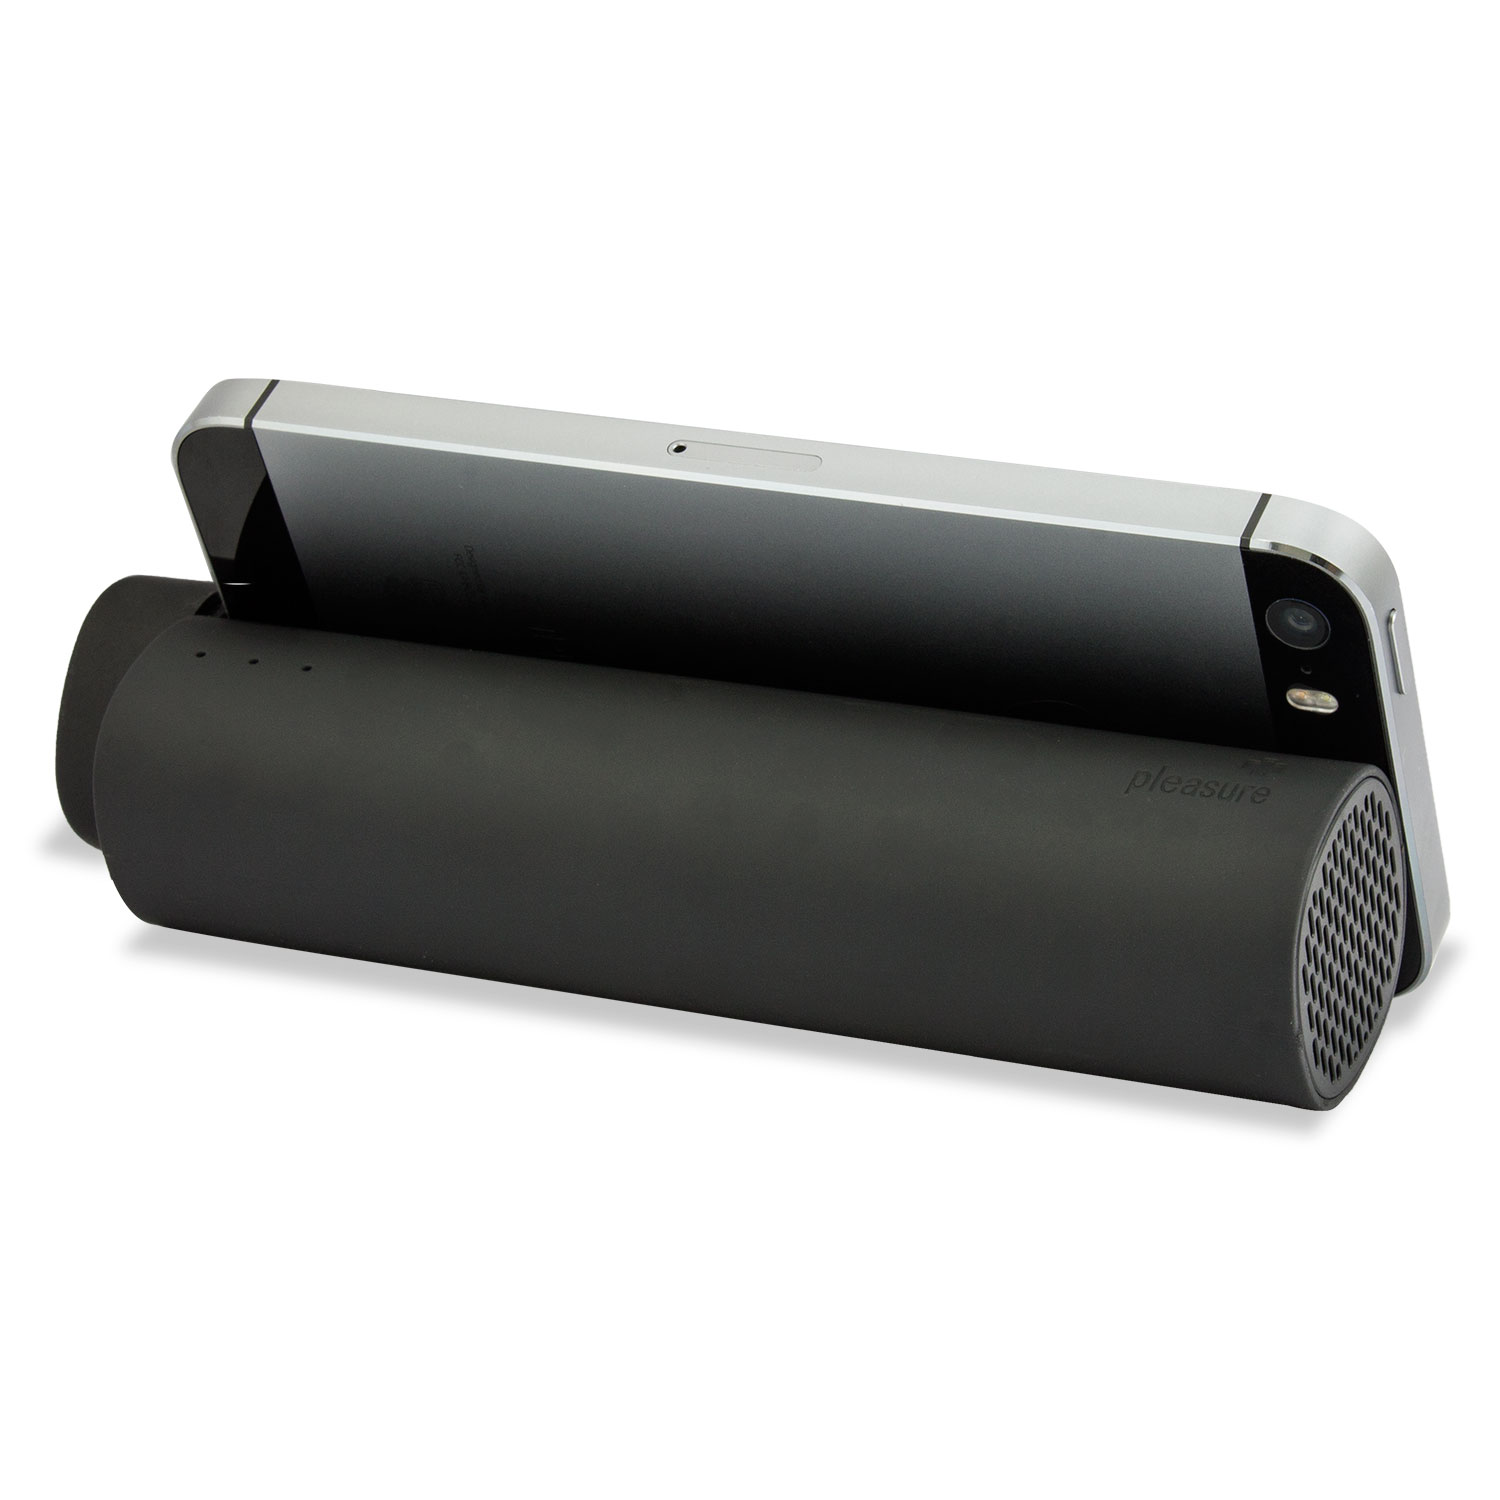 X-Power 3-in-1 Speaker, 4000mAh Power Bank and Stand - Black